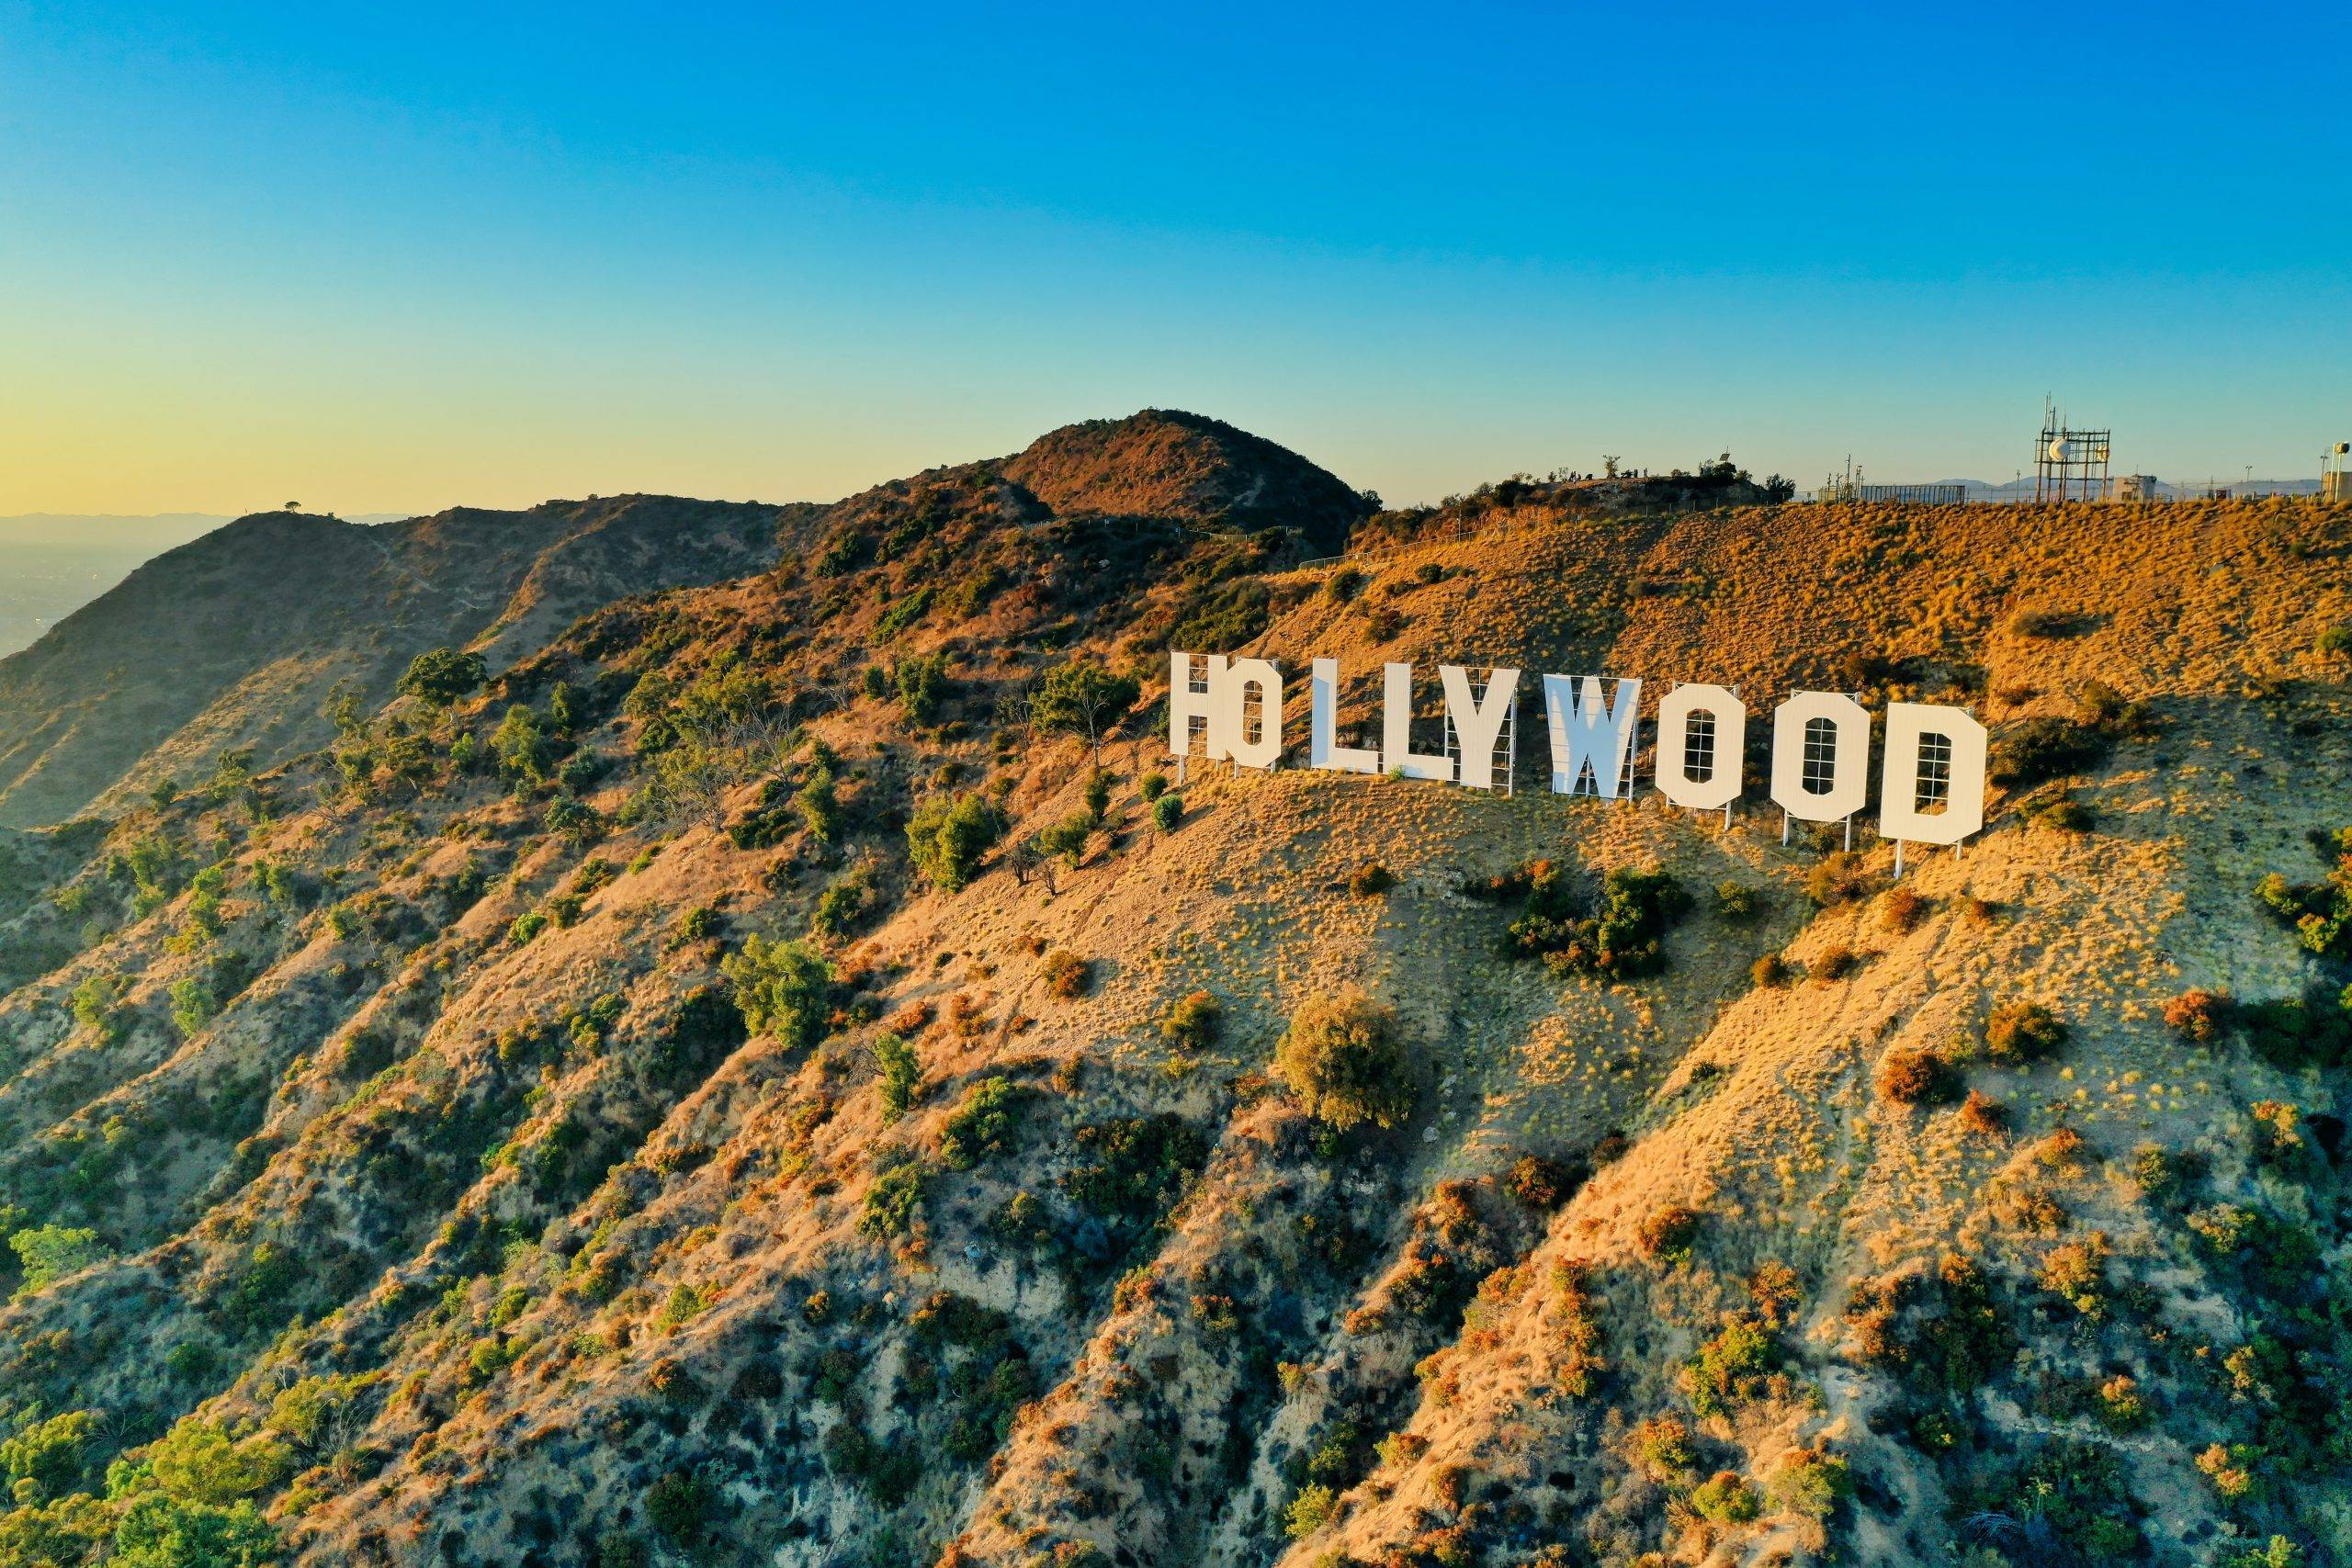 3 Famous Hollywood Minimalists Who Break With Common Stereotypes - Hollywood sign at sunset